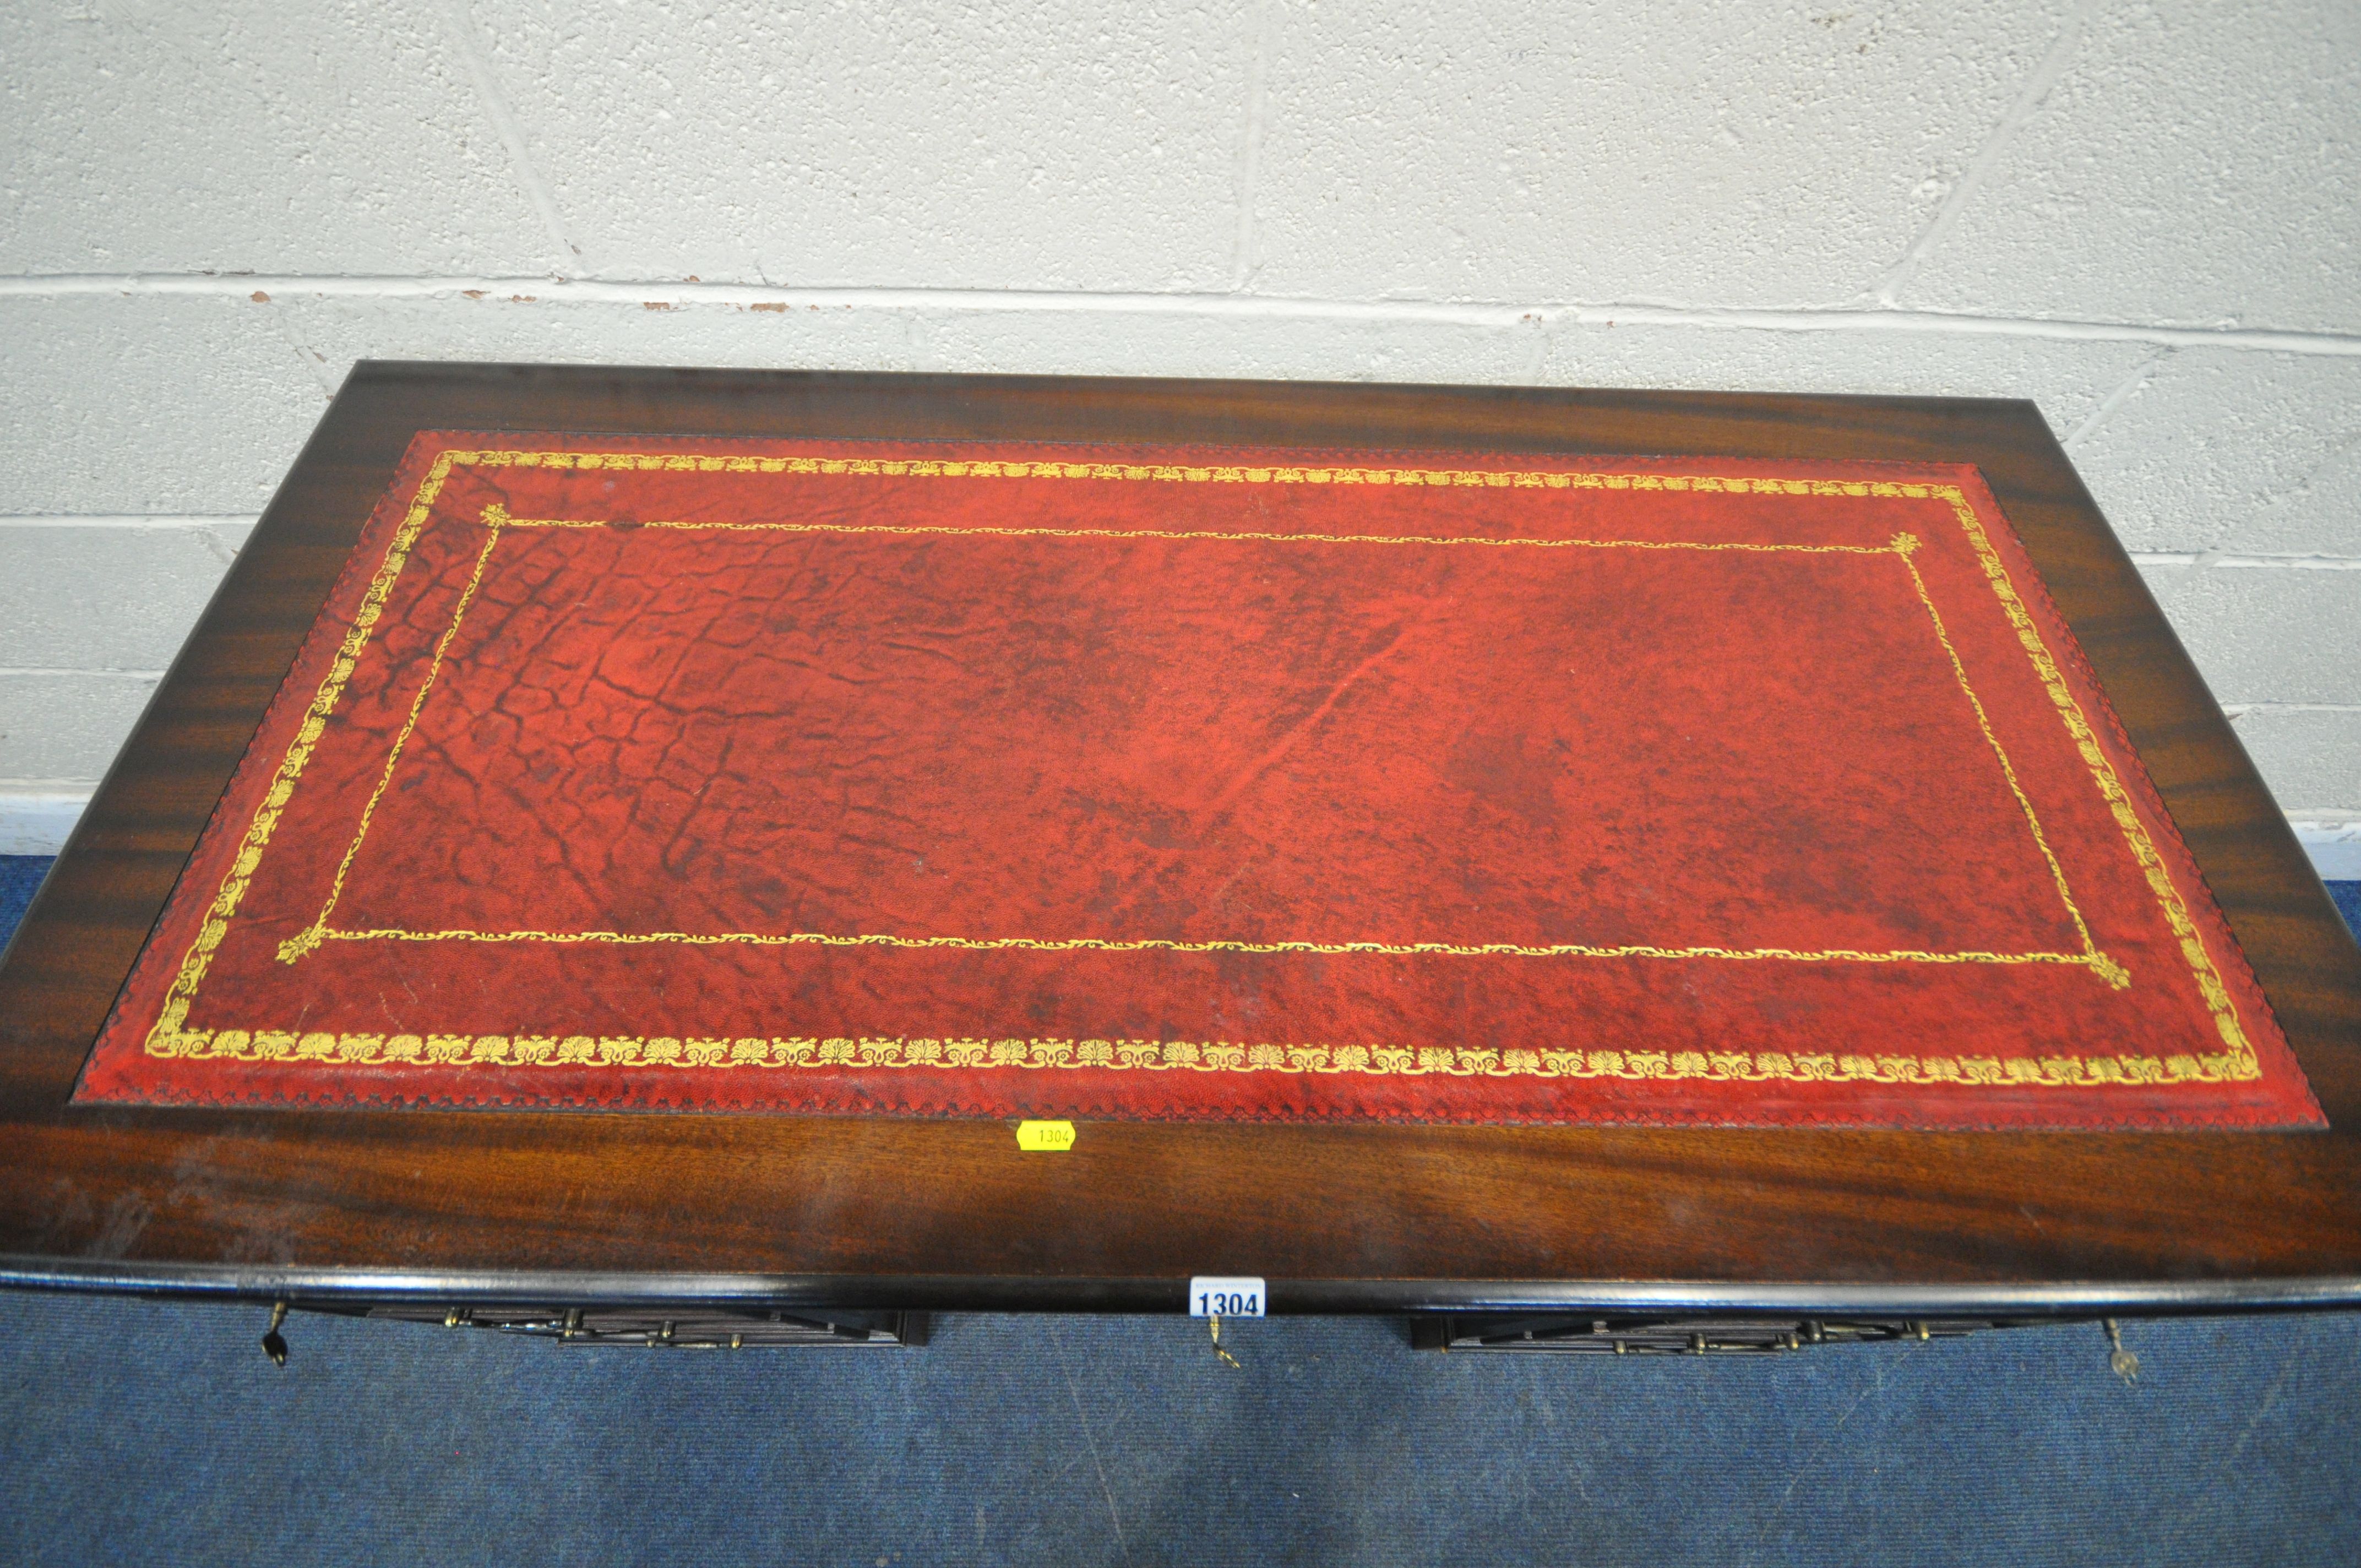 A 20TH CENTURY MAHOGANY TWIN PEDESTAL DESK, with an oxblood leather writing surface, and an - Image 2 of 4